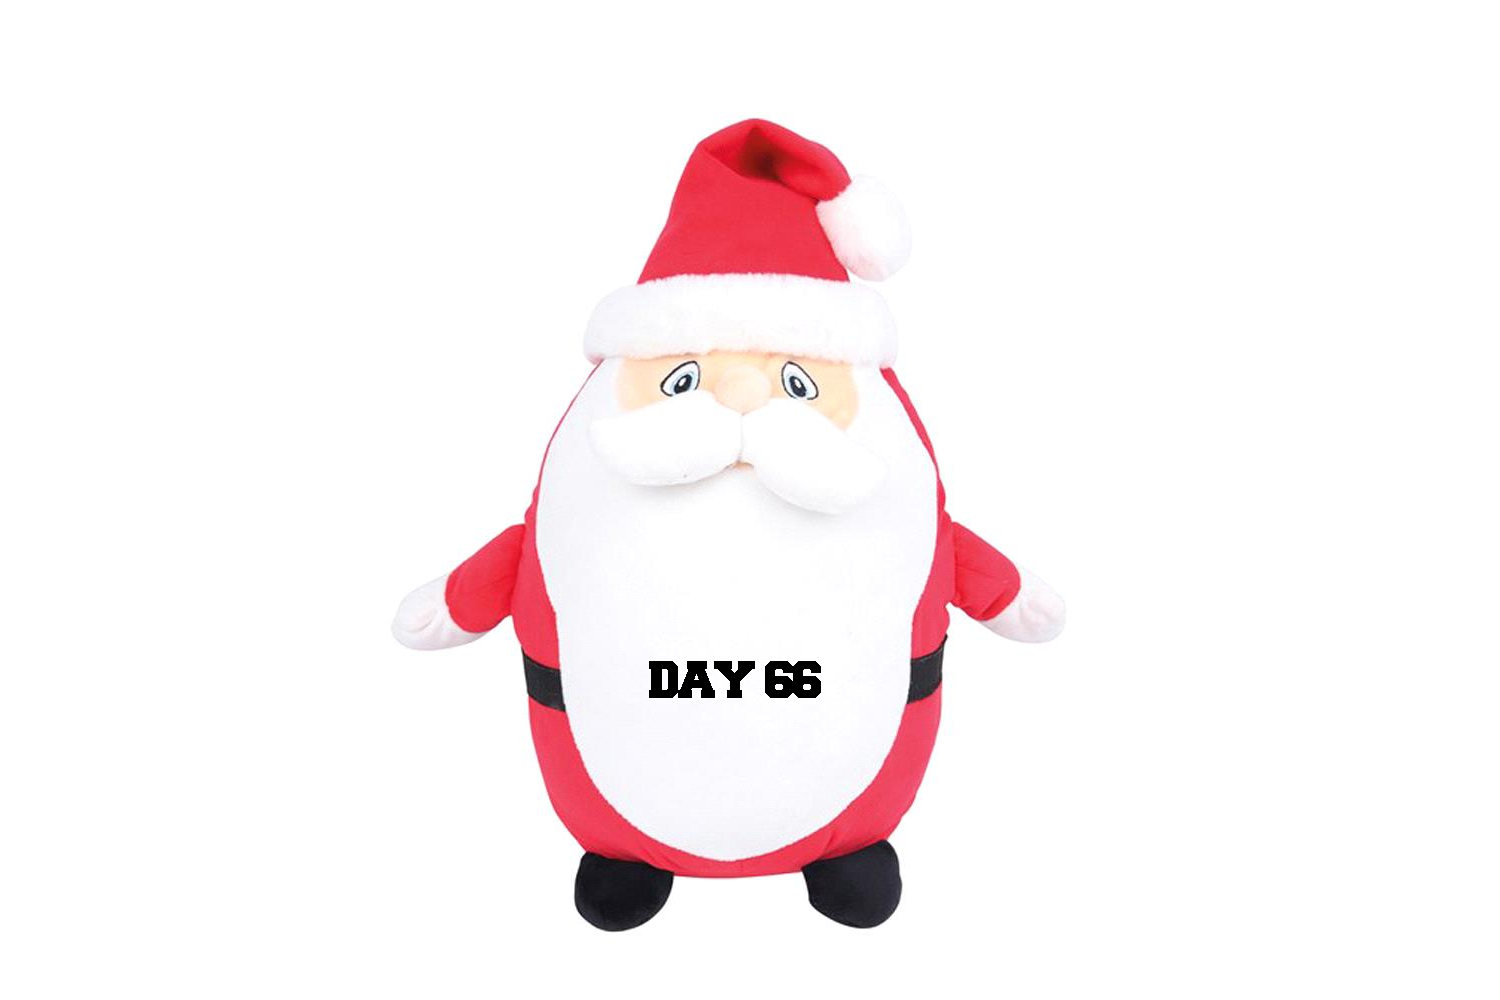 Day 66 Father Christmas Teddy